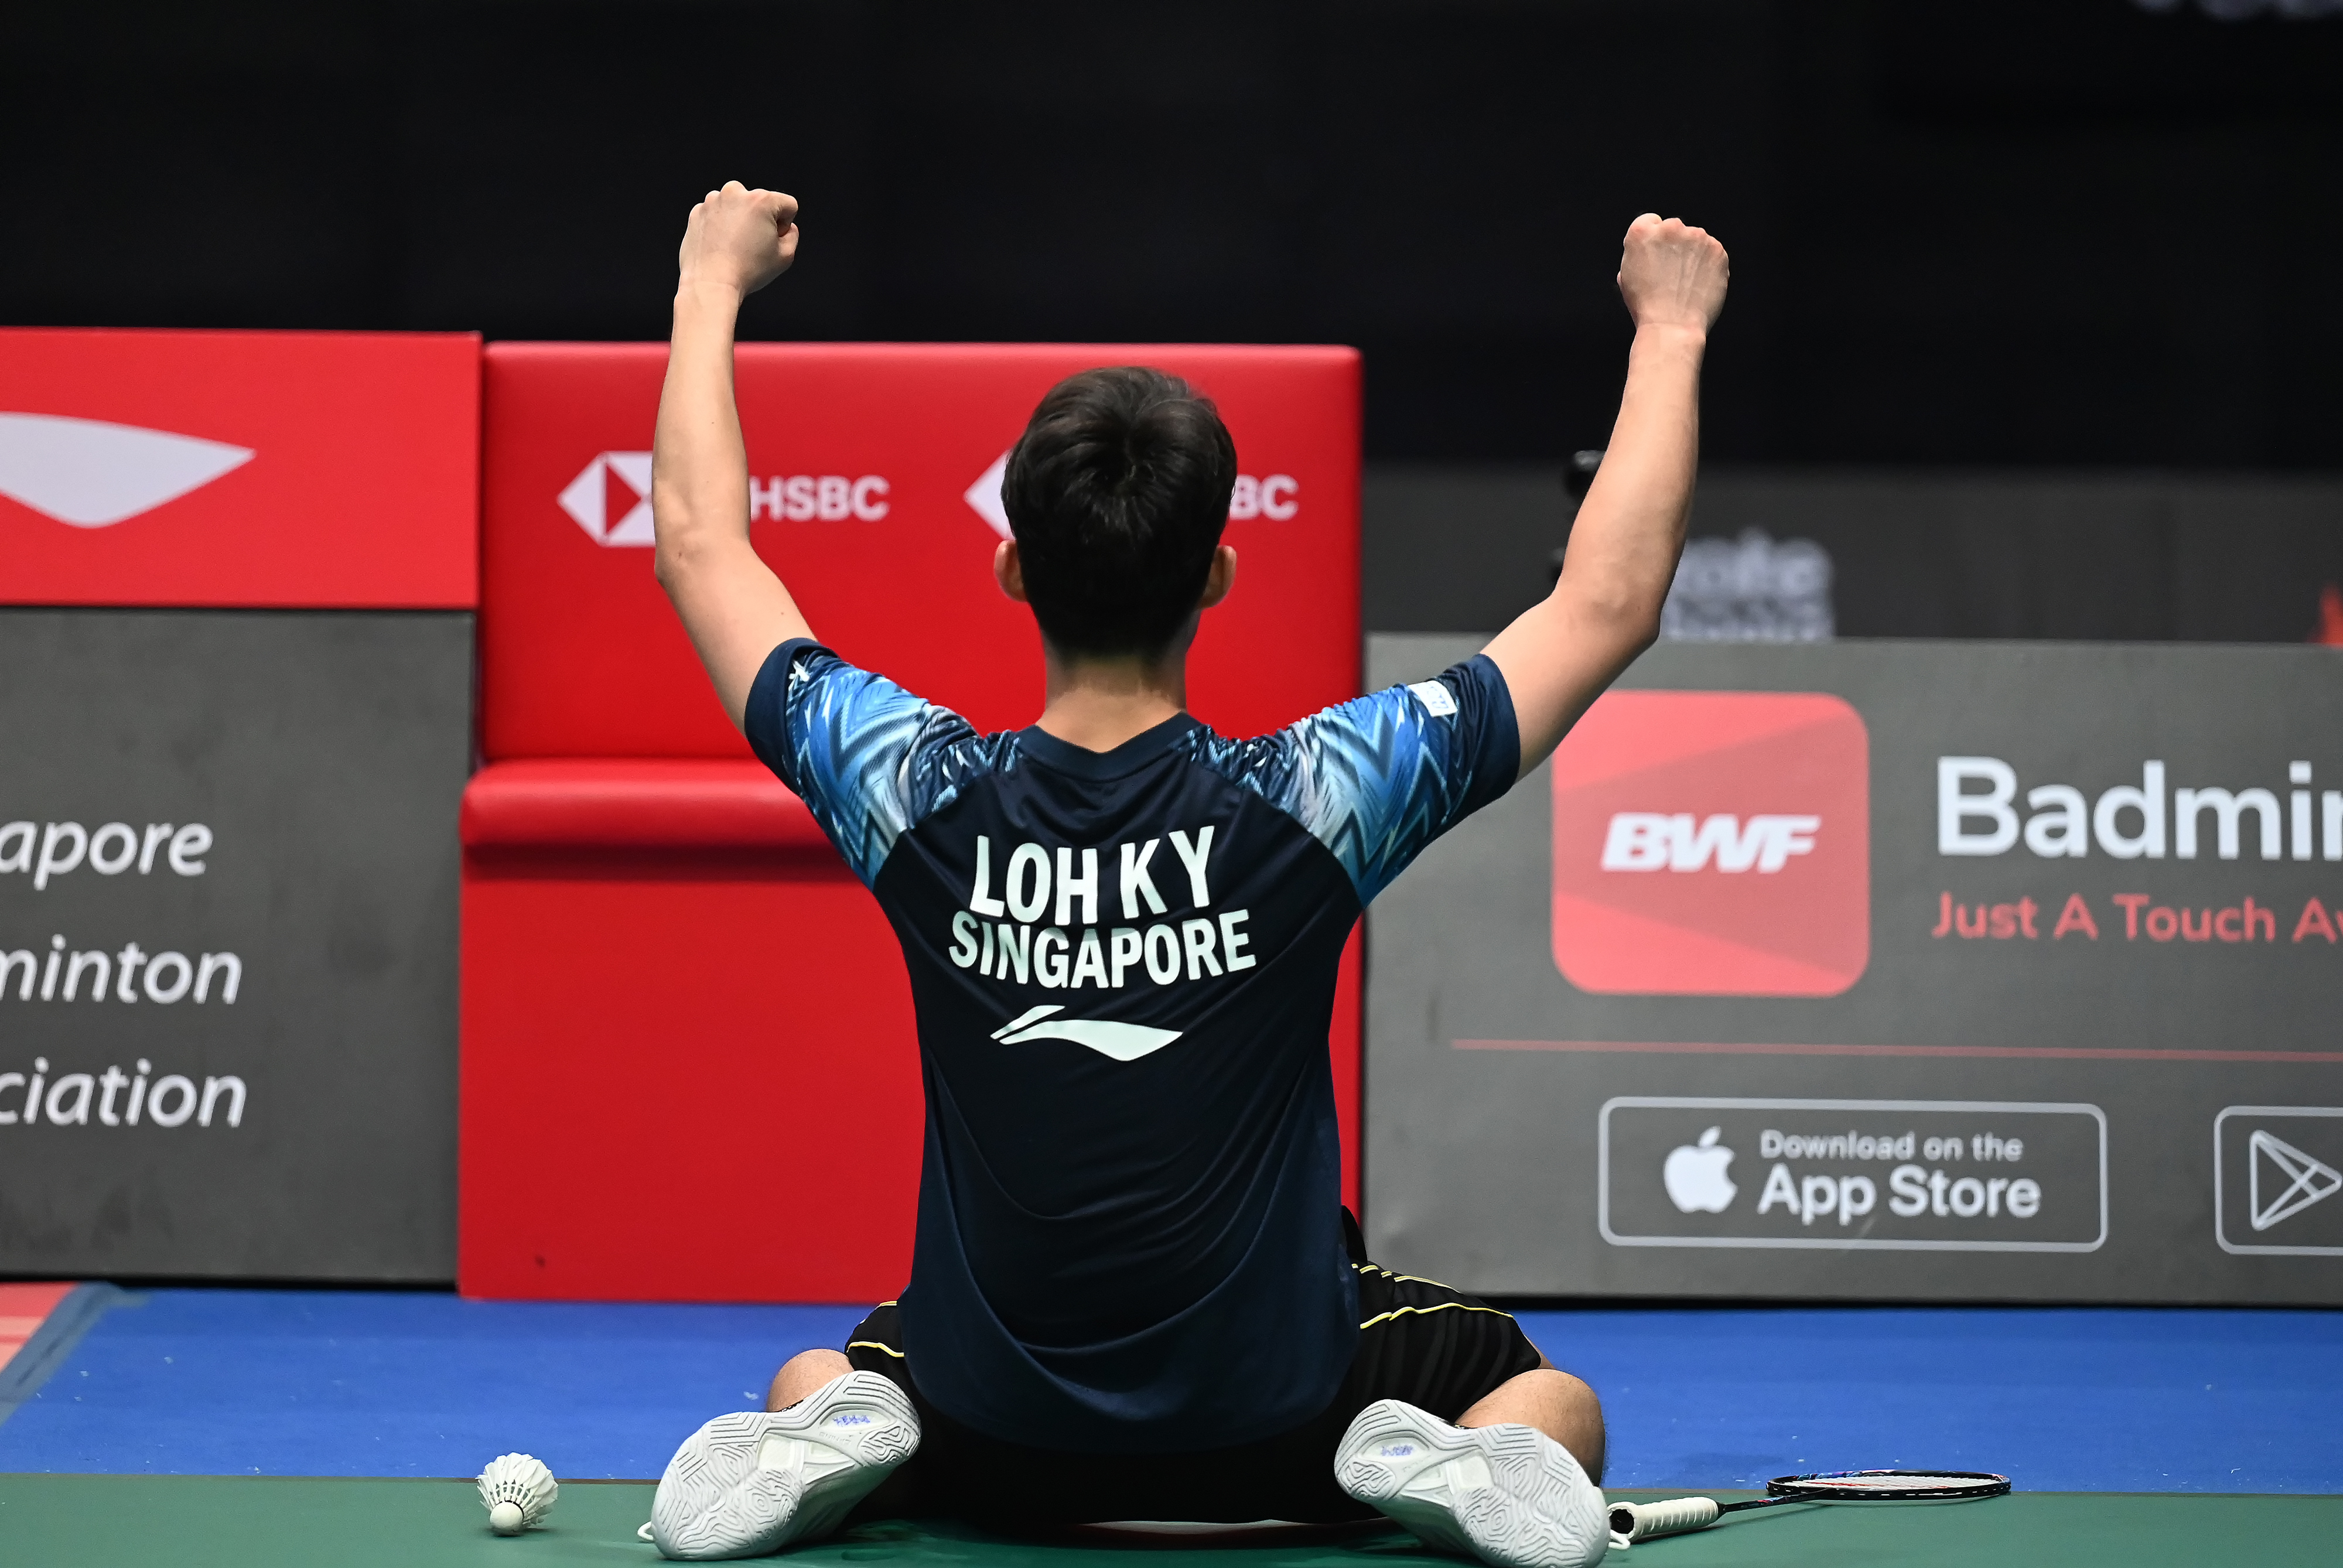 TeamSGs Loh Kean Yew continues on sizzling run to reach Singapore Badminton Open semis!